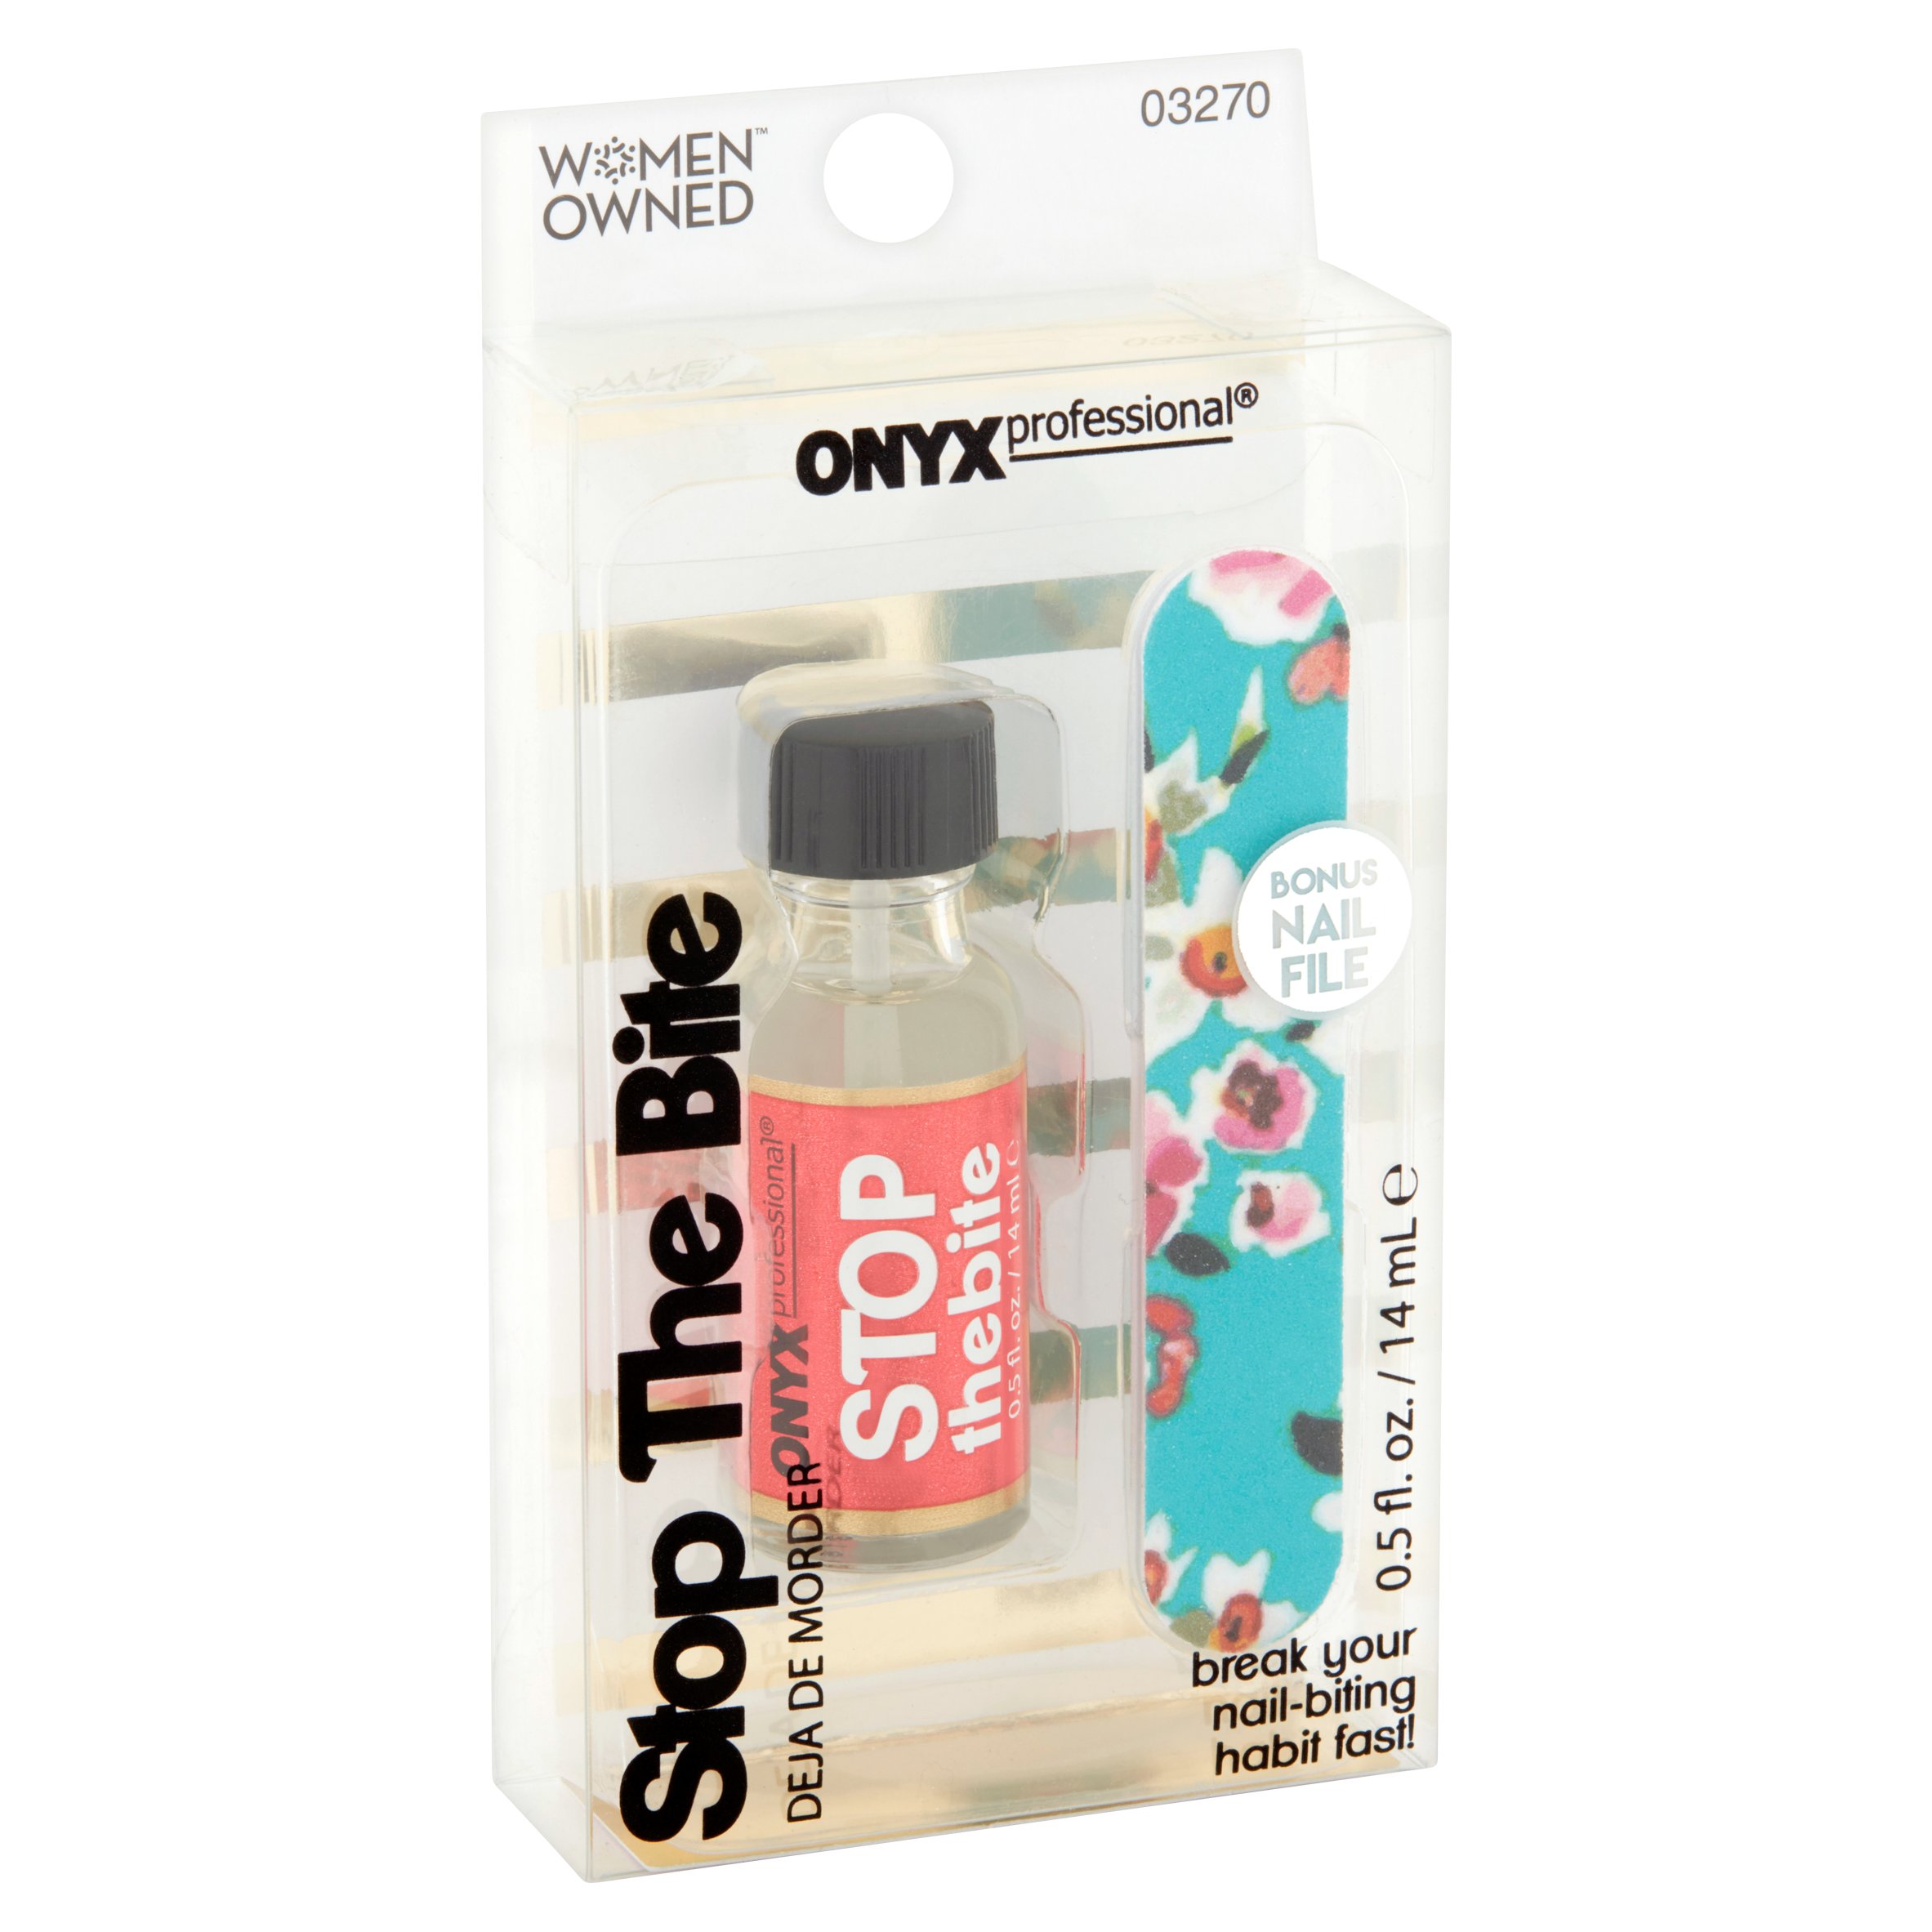 Onyx Professional Stop the Bite Nail-Biting Deterrent and File, 0.5 fl oz - image 2 of 4